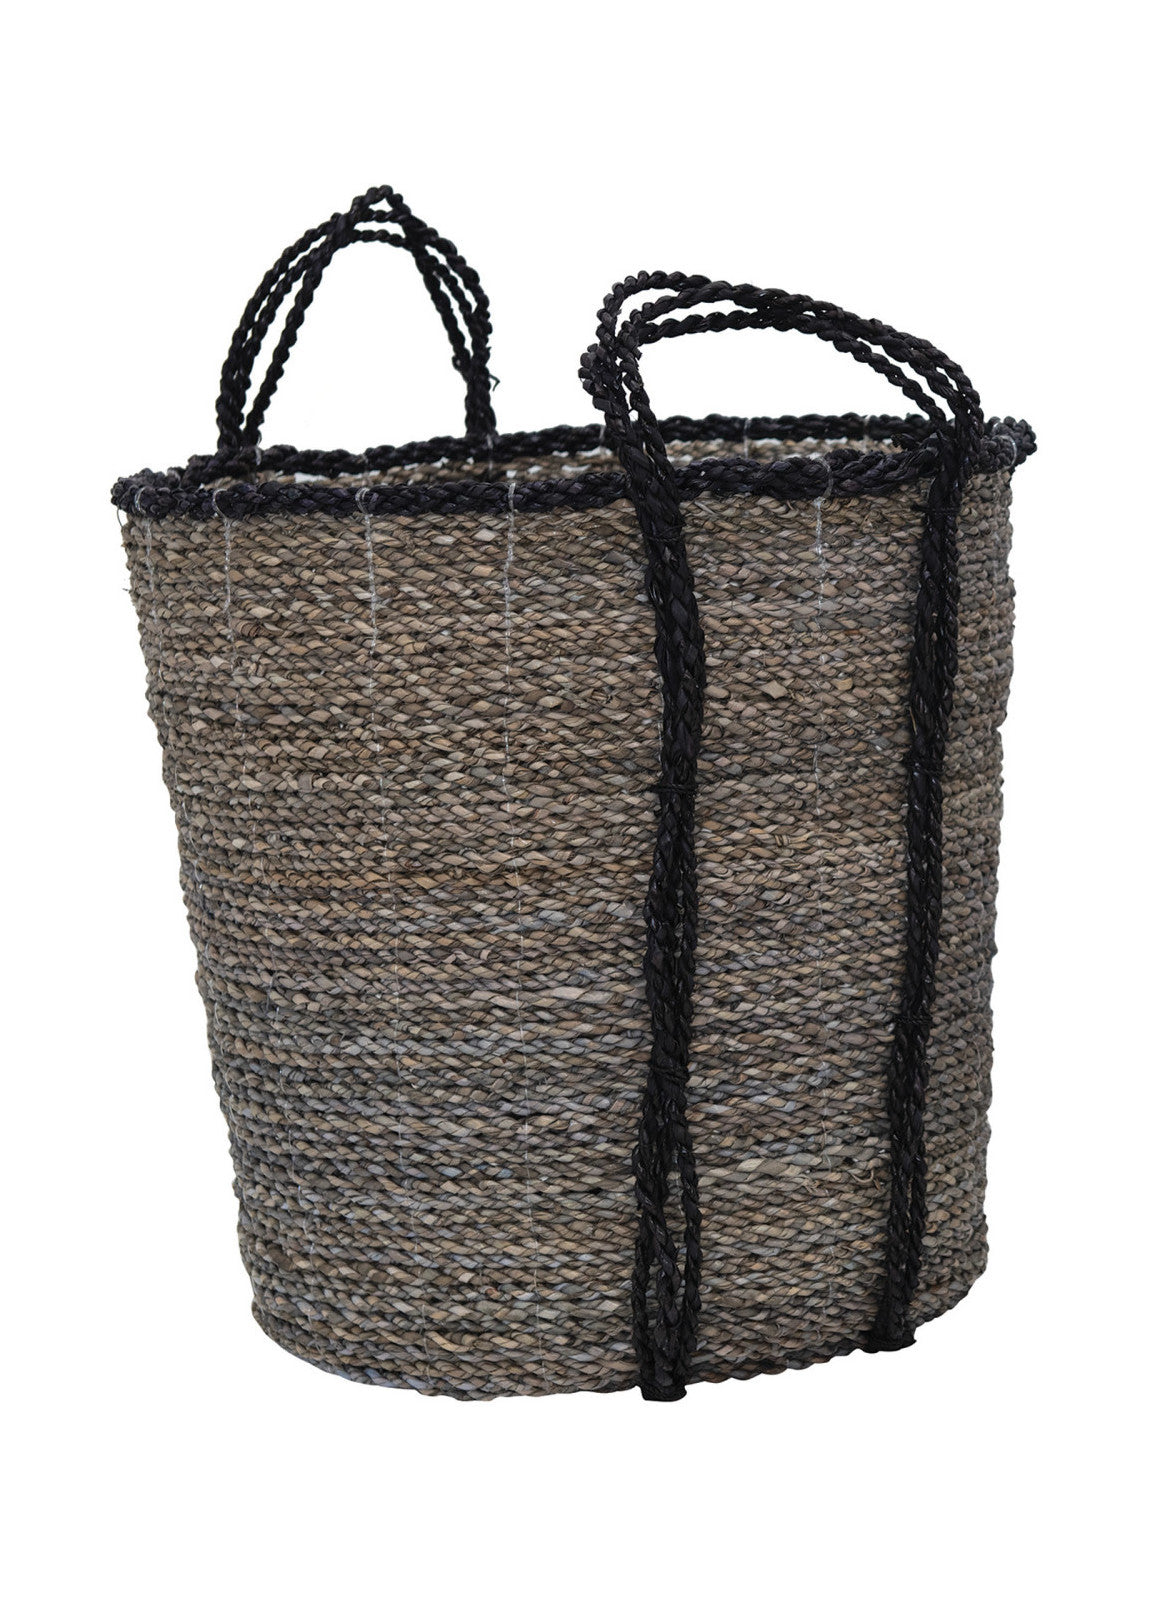 Hand-Woven Seagrass Basket w/ Handles - Large